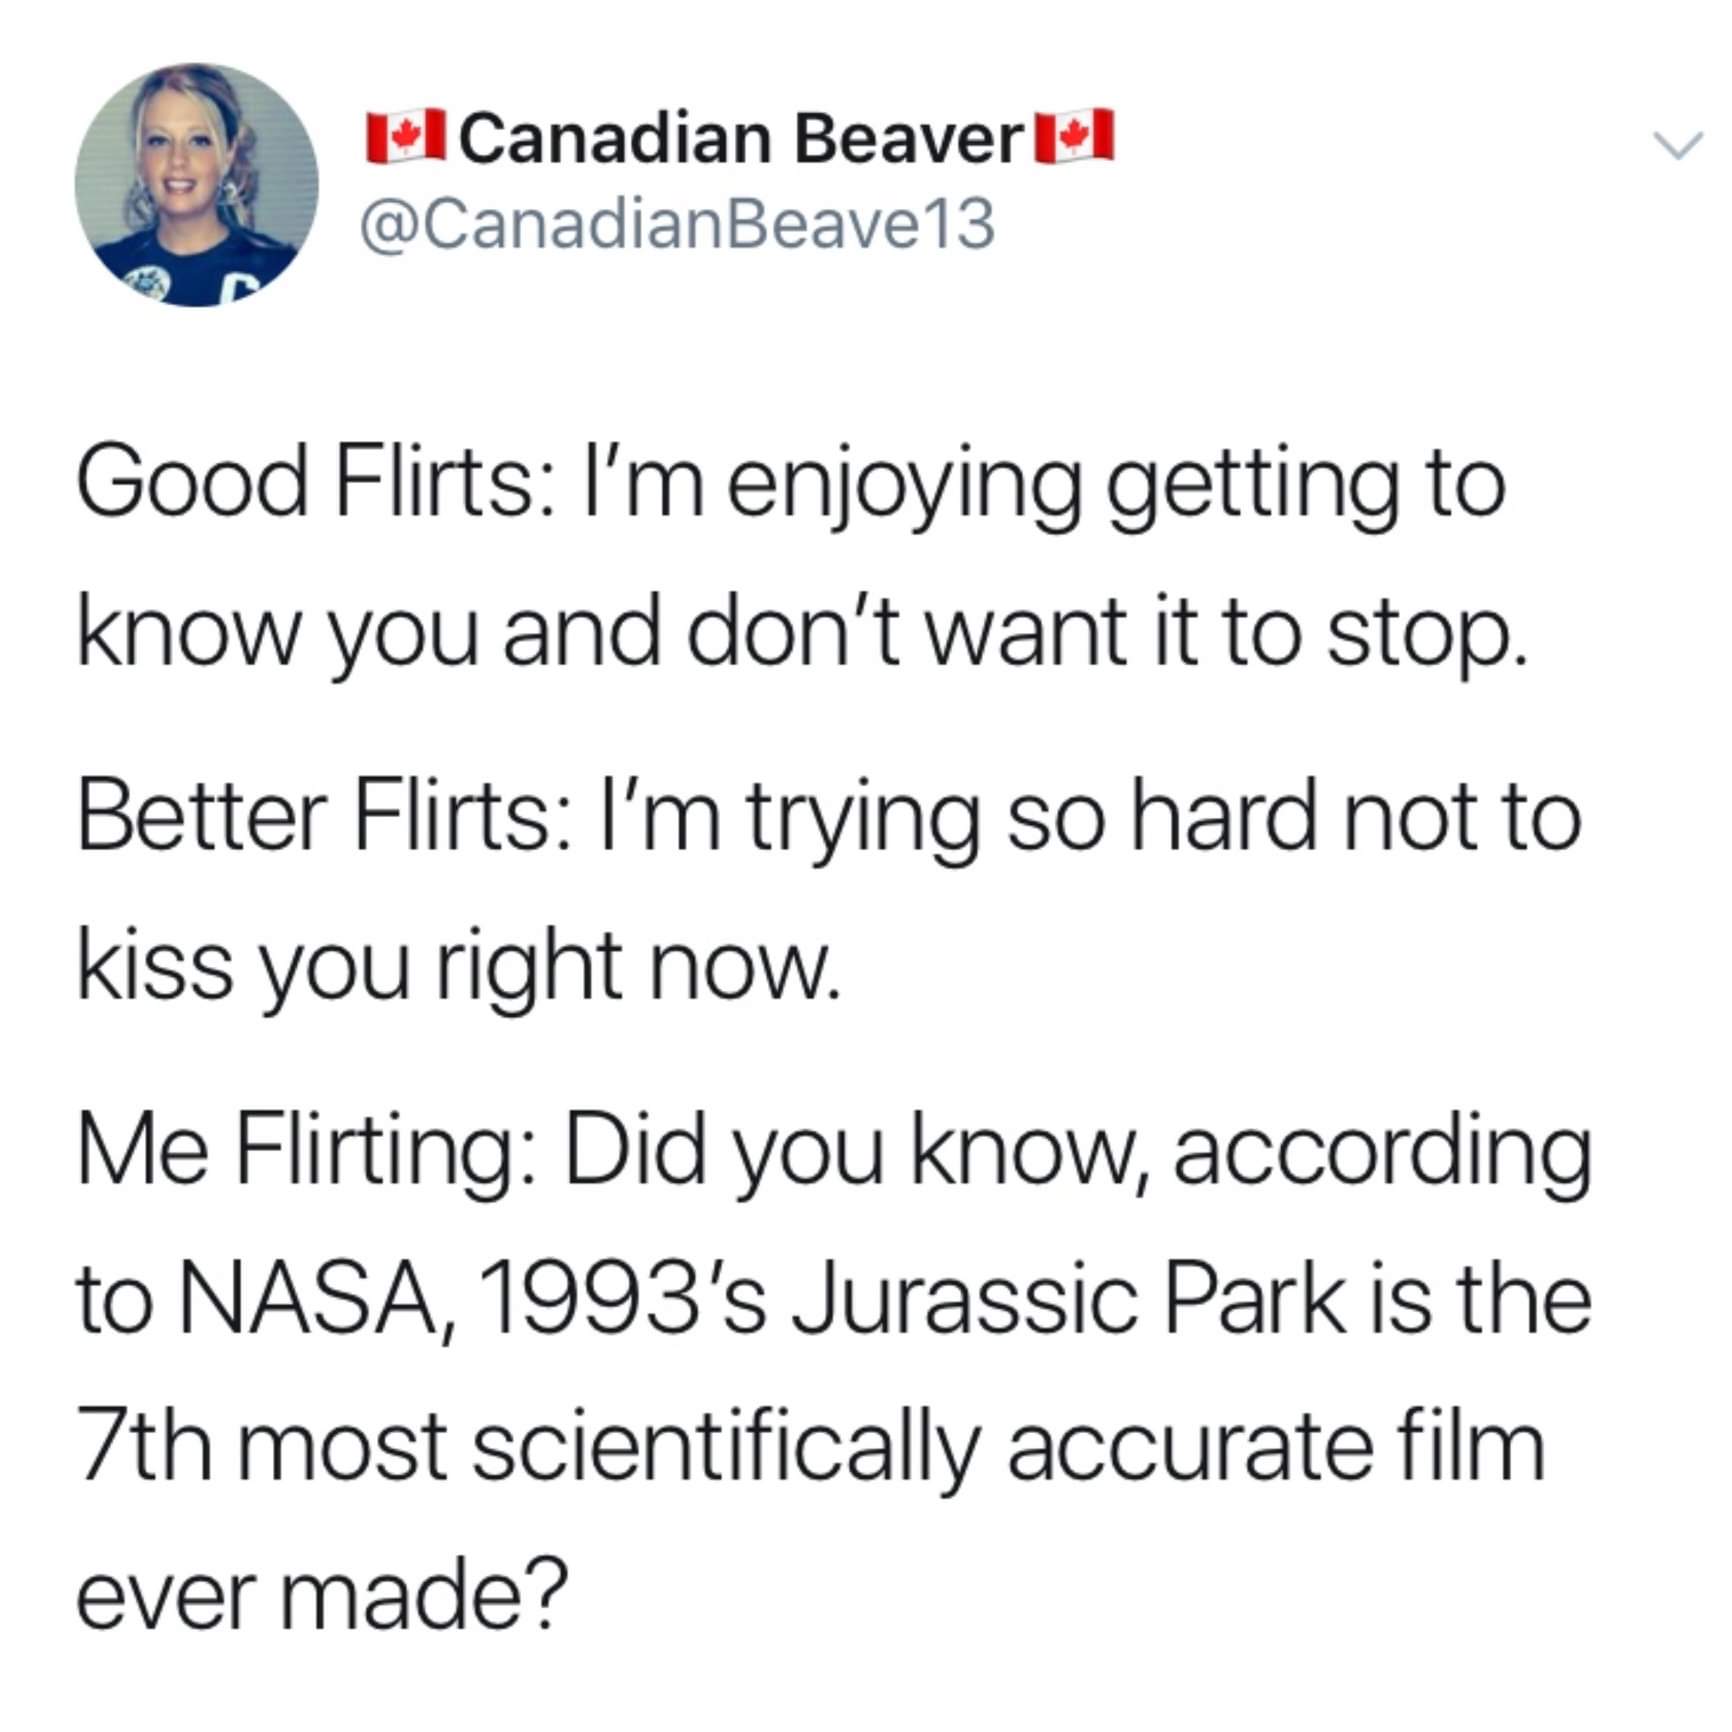 angle - I Canadian Beaver Good Flirts I'm enjoying getting to know you and don't want it to stop. Better Flirts I'm trying so hard not to kiss you right now. Me Flirting Did you know, according to Nasa, 1993's Jurassic Park is the 7th most scientifically 